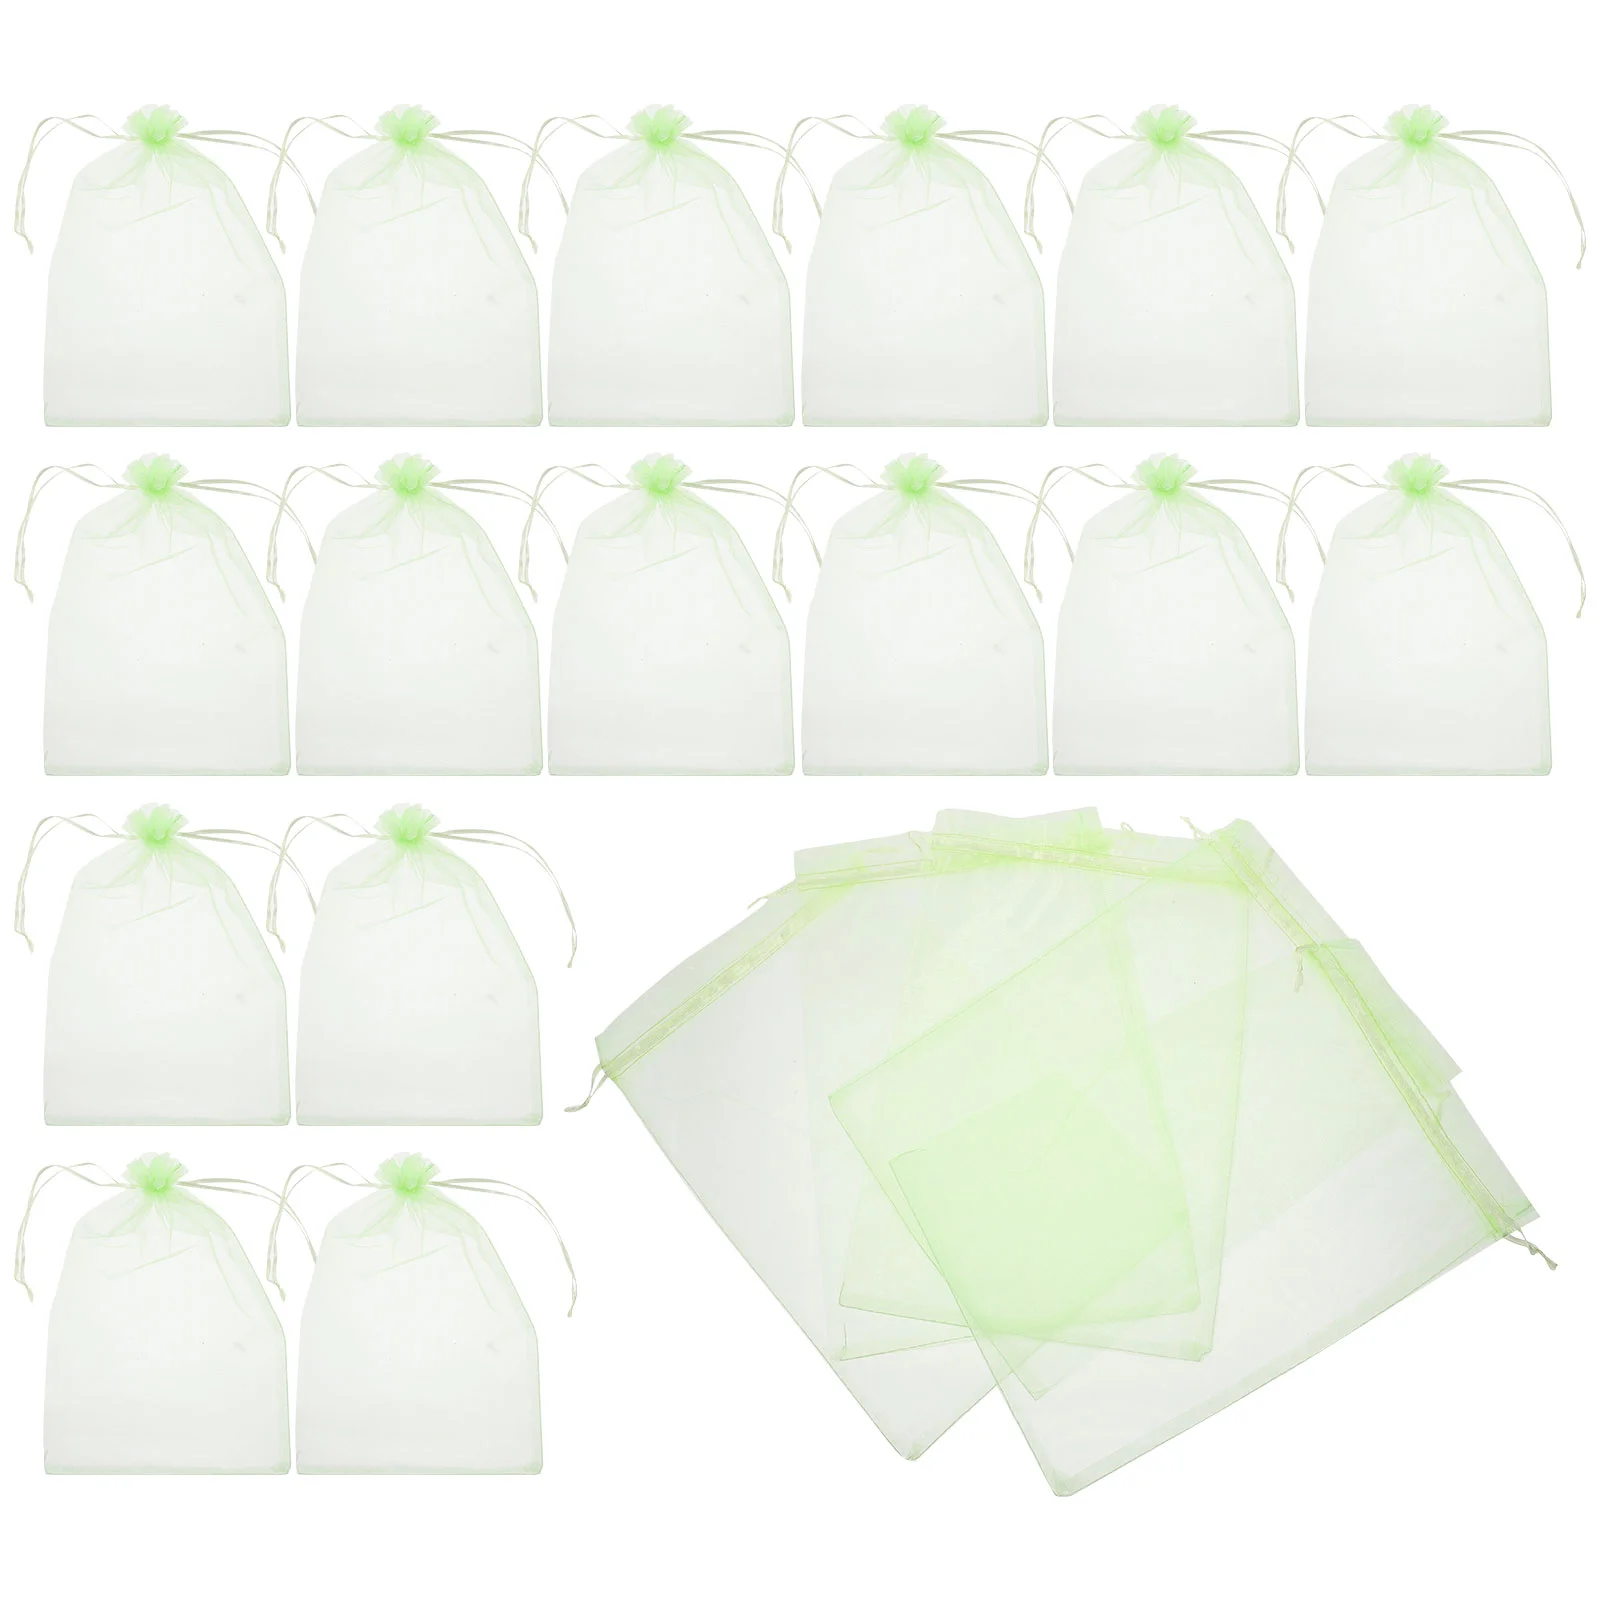 

50 Pcs Fruit Protection Bag Strawberry Plants Garden Supplies Netting Barrier Mesh Multifunction Organza Cover Bags